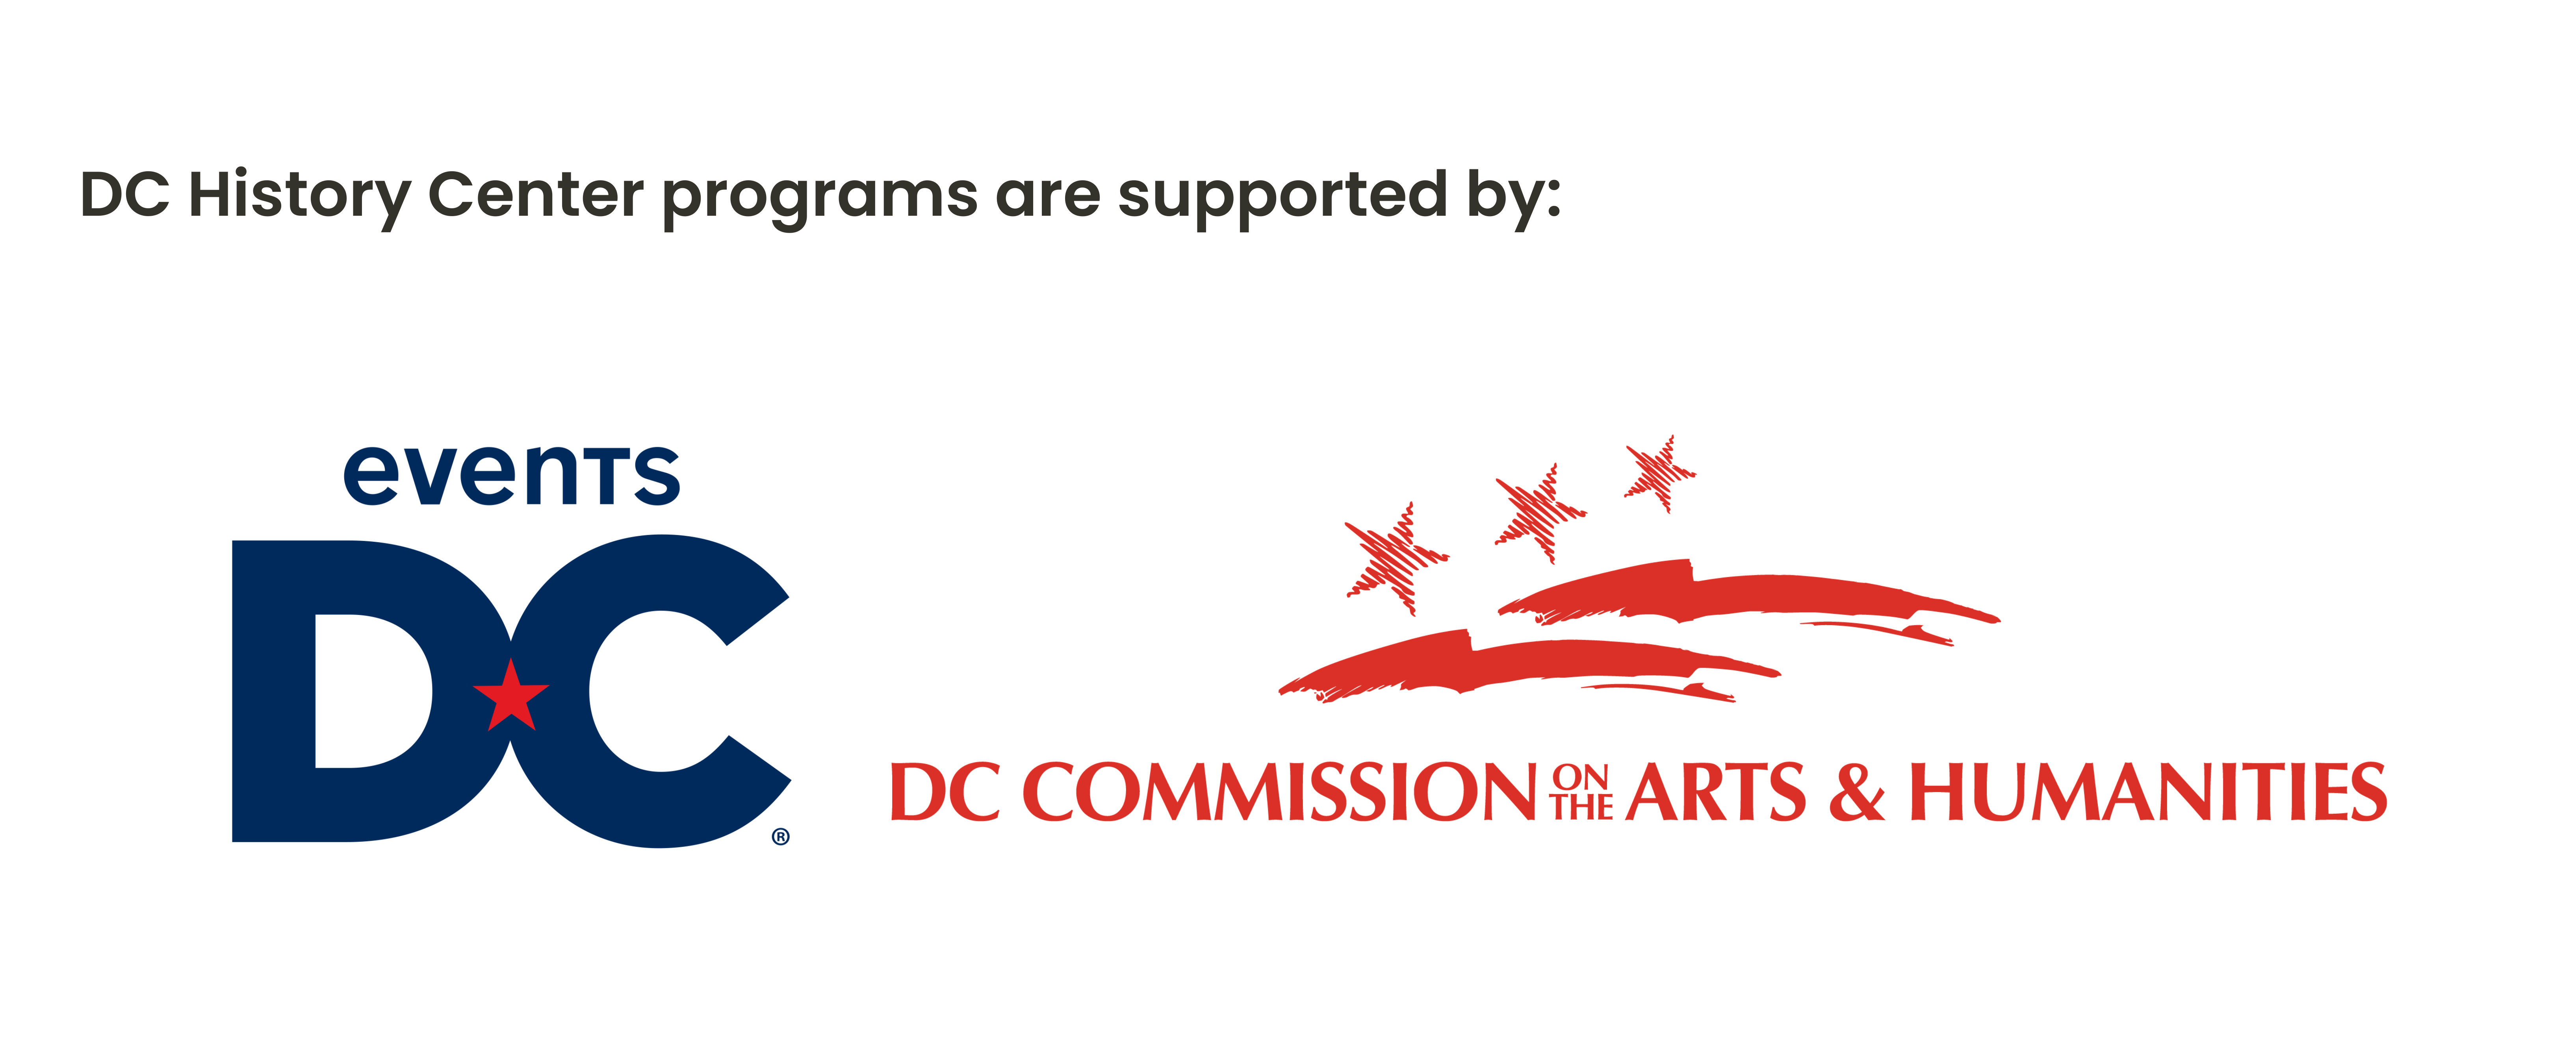 A graphic with mostly text reads DC History Center Programs are supported by Events DC and the DC Commission on the Arts. The logos at the bottom are blue and red.